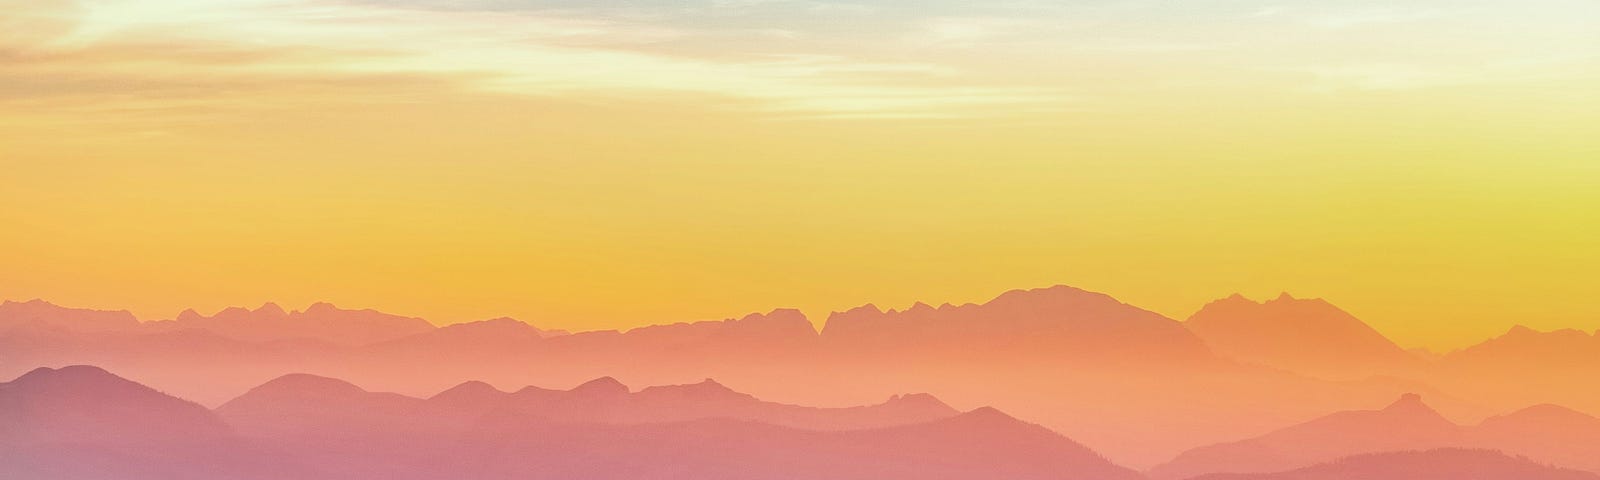 an alluring landscape of dusky mountains with a person standing, pinkish-yellow horizon and white/blue skies.